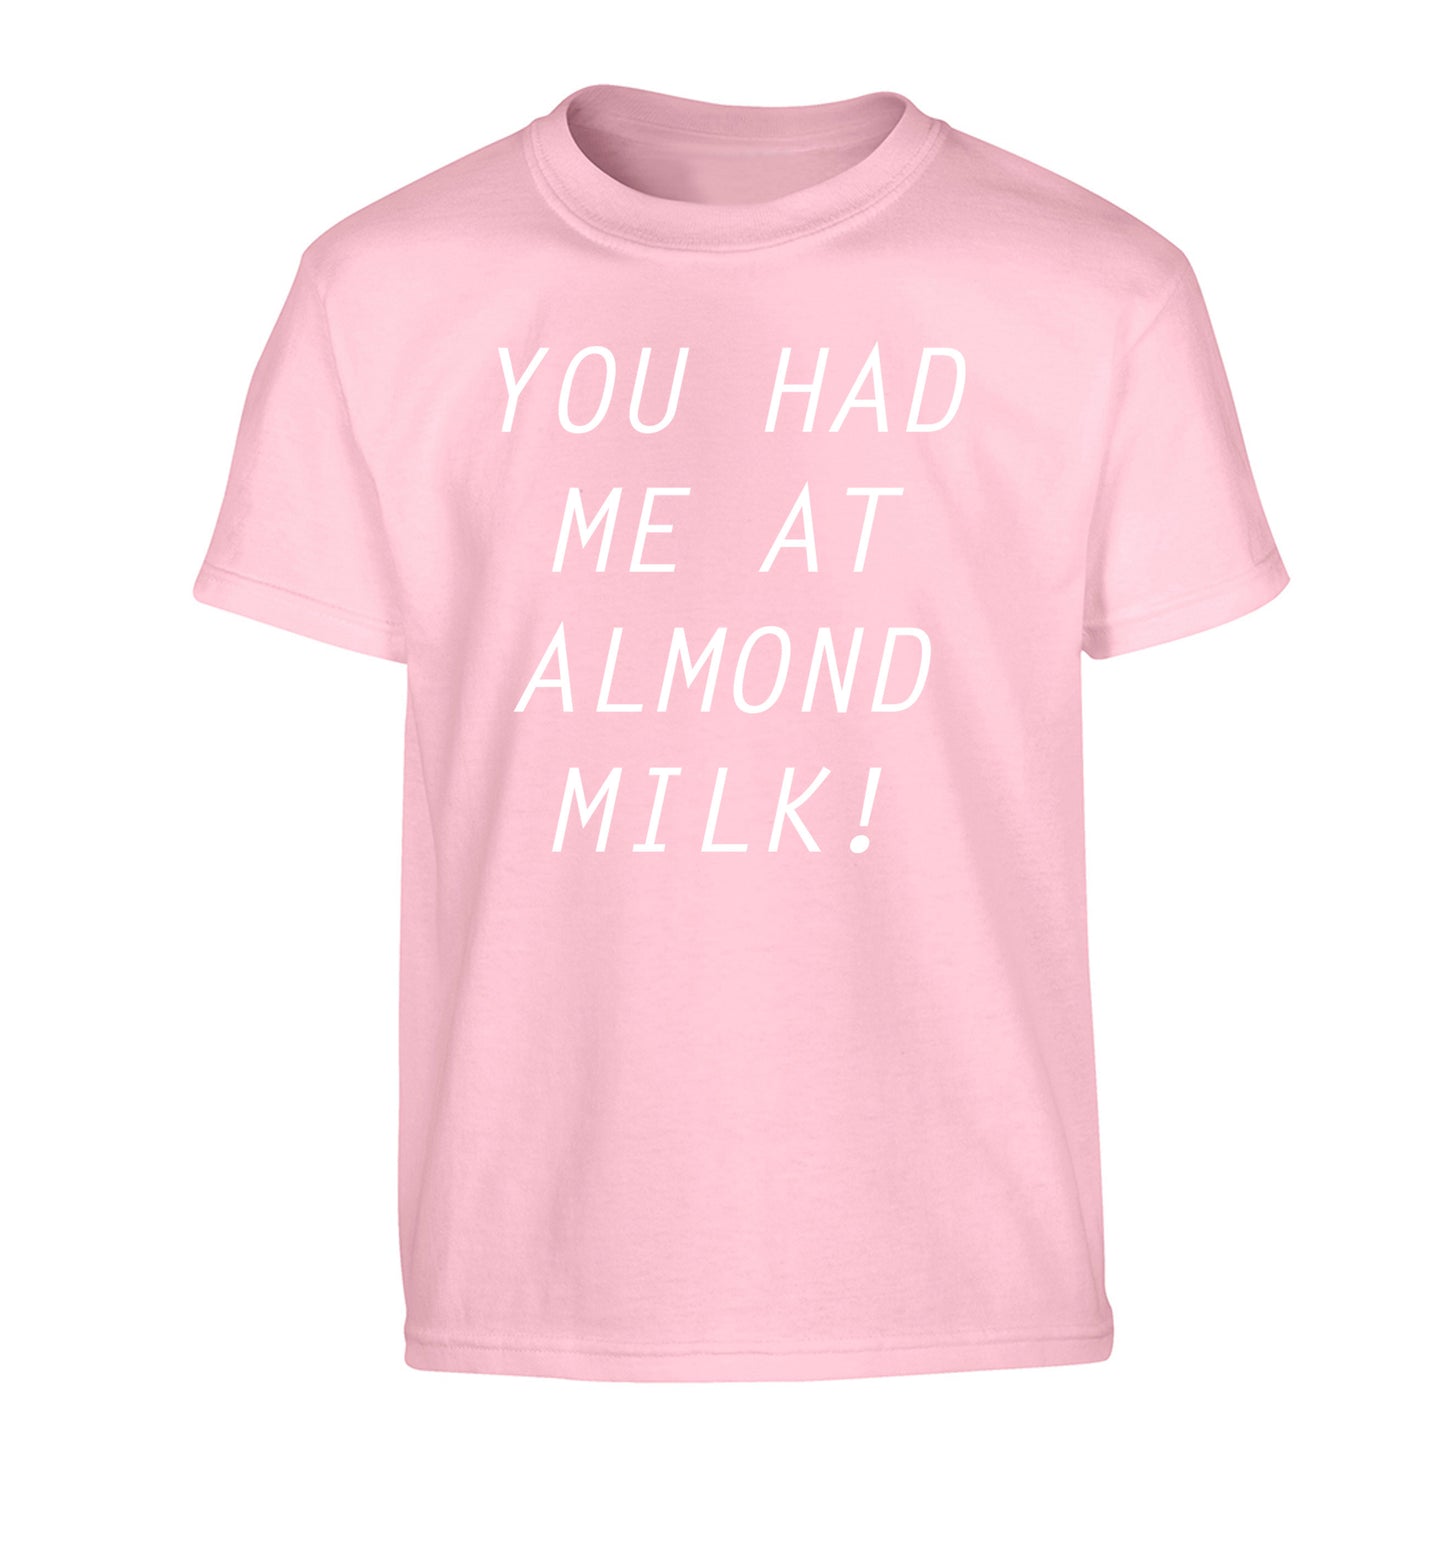 You had me at almond milk Children's light pink Tshirt 12-14 Years